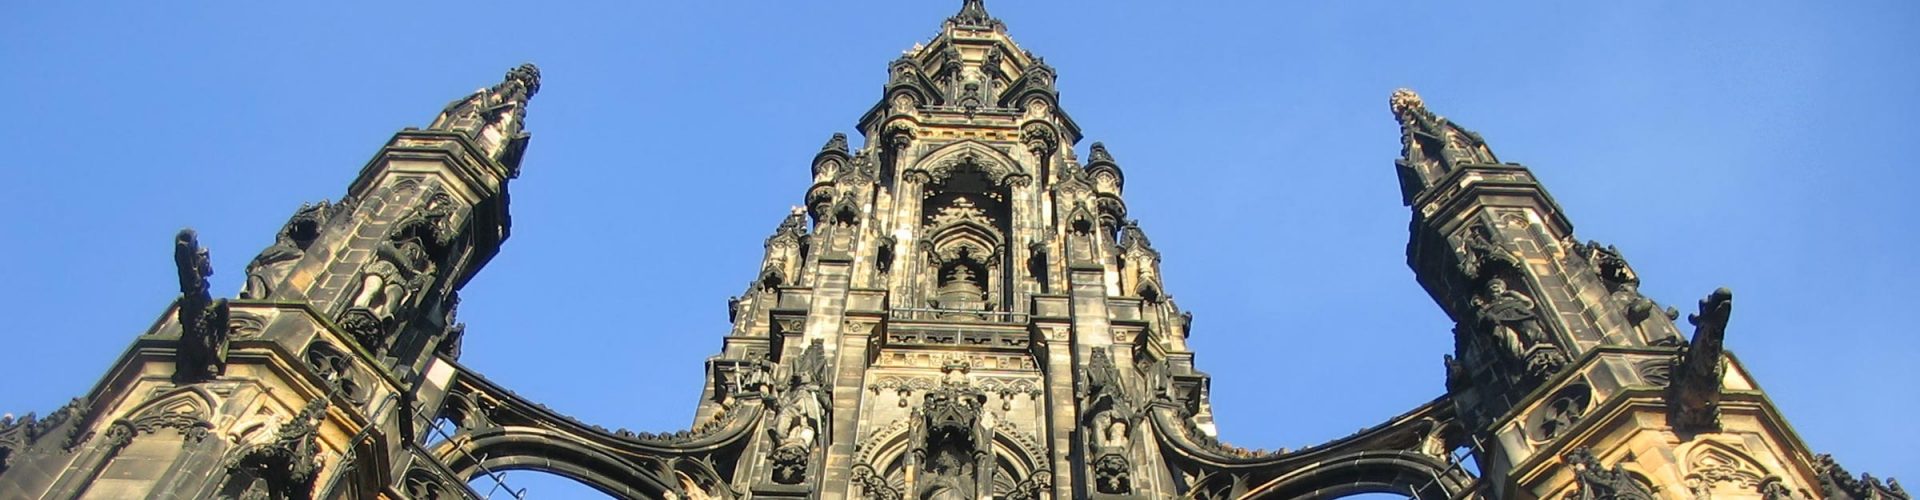 Looking up to the top of the Scott Monument in Edinburgh